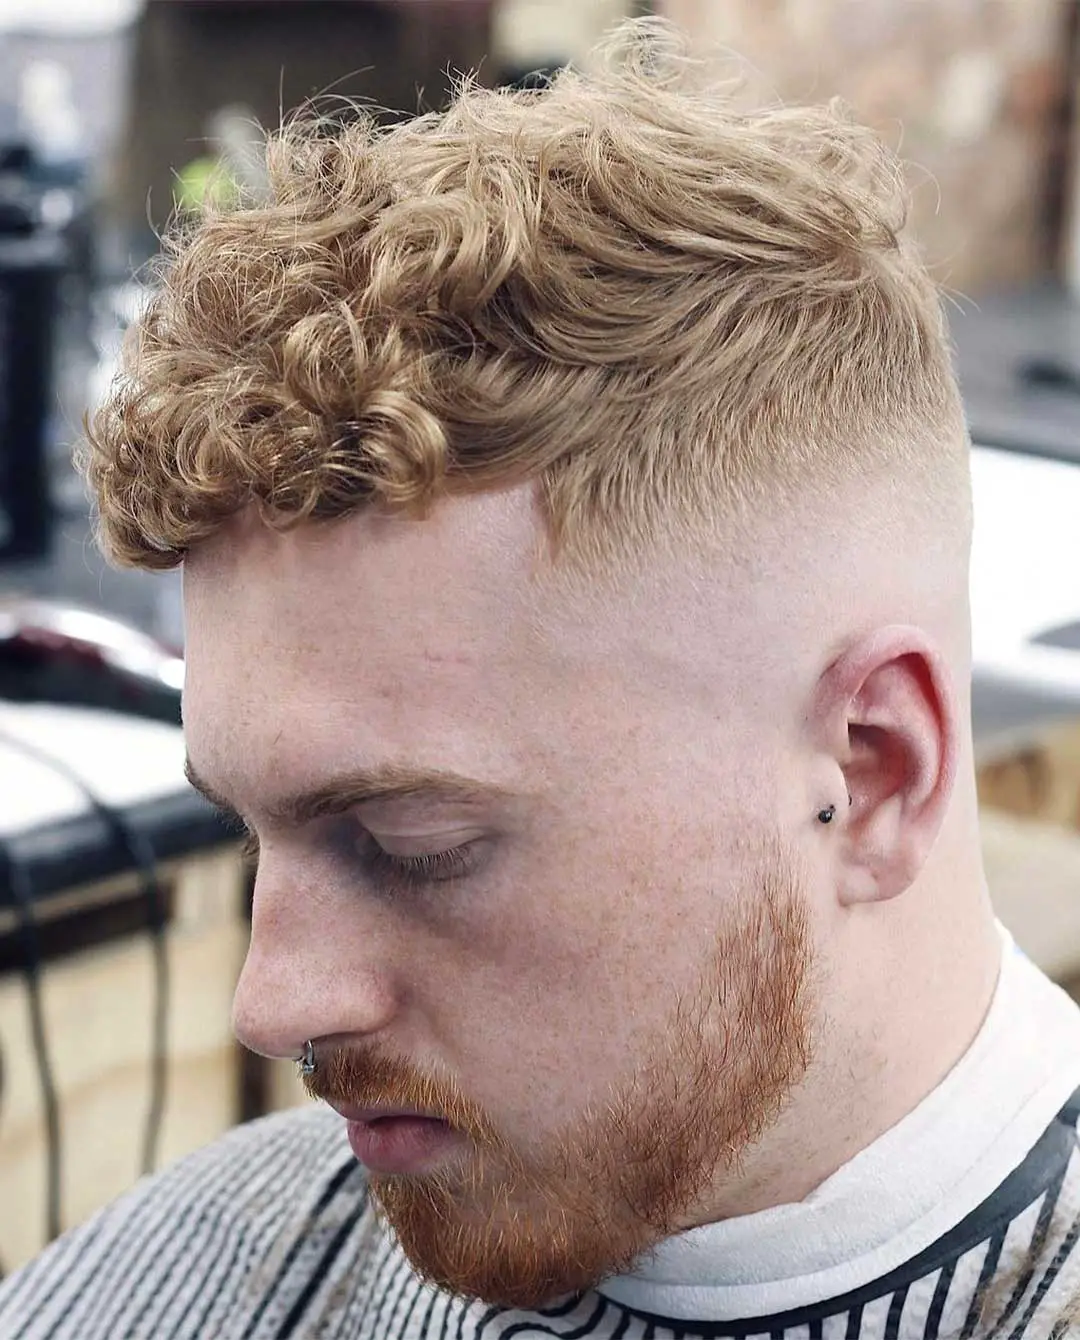 Blonde Haircut with Skin Fade

